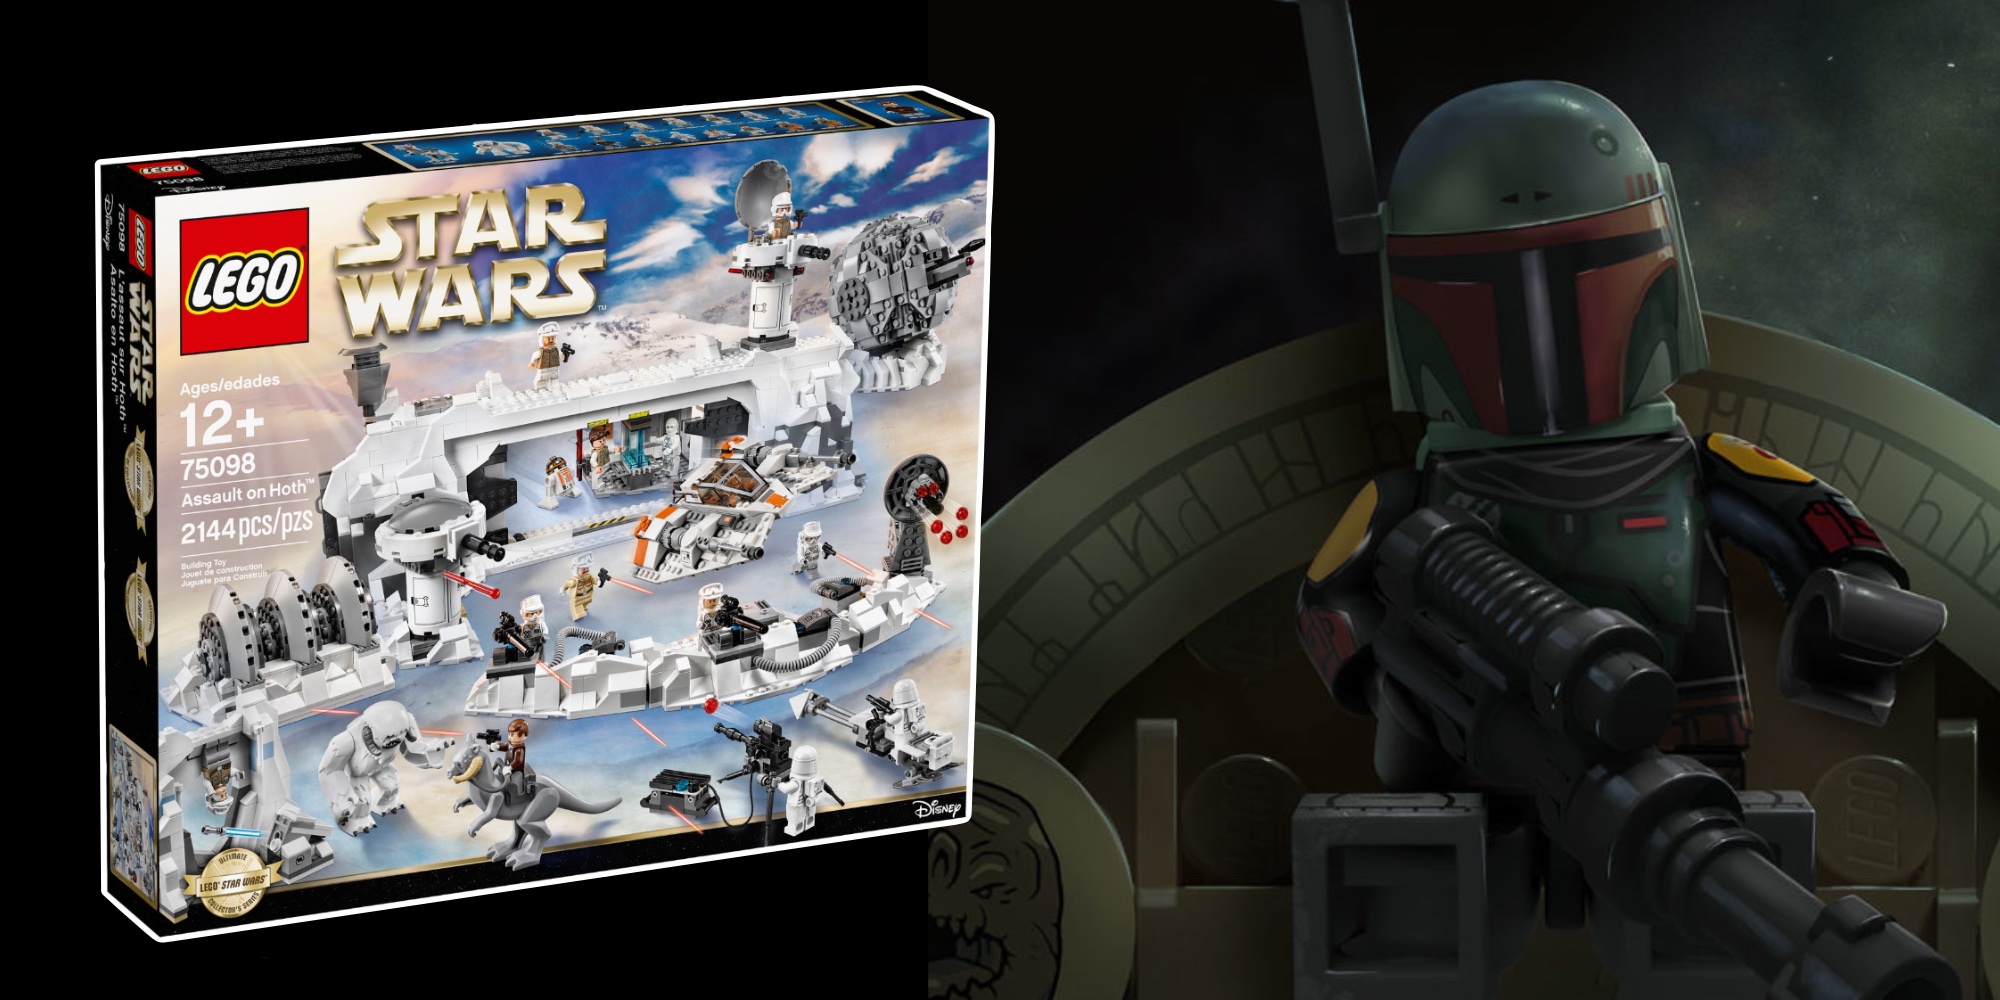 Lego August 2022 Calendar Lego Star Wars Summer 2022 Lineup: What To Expect - 9To5Toys